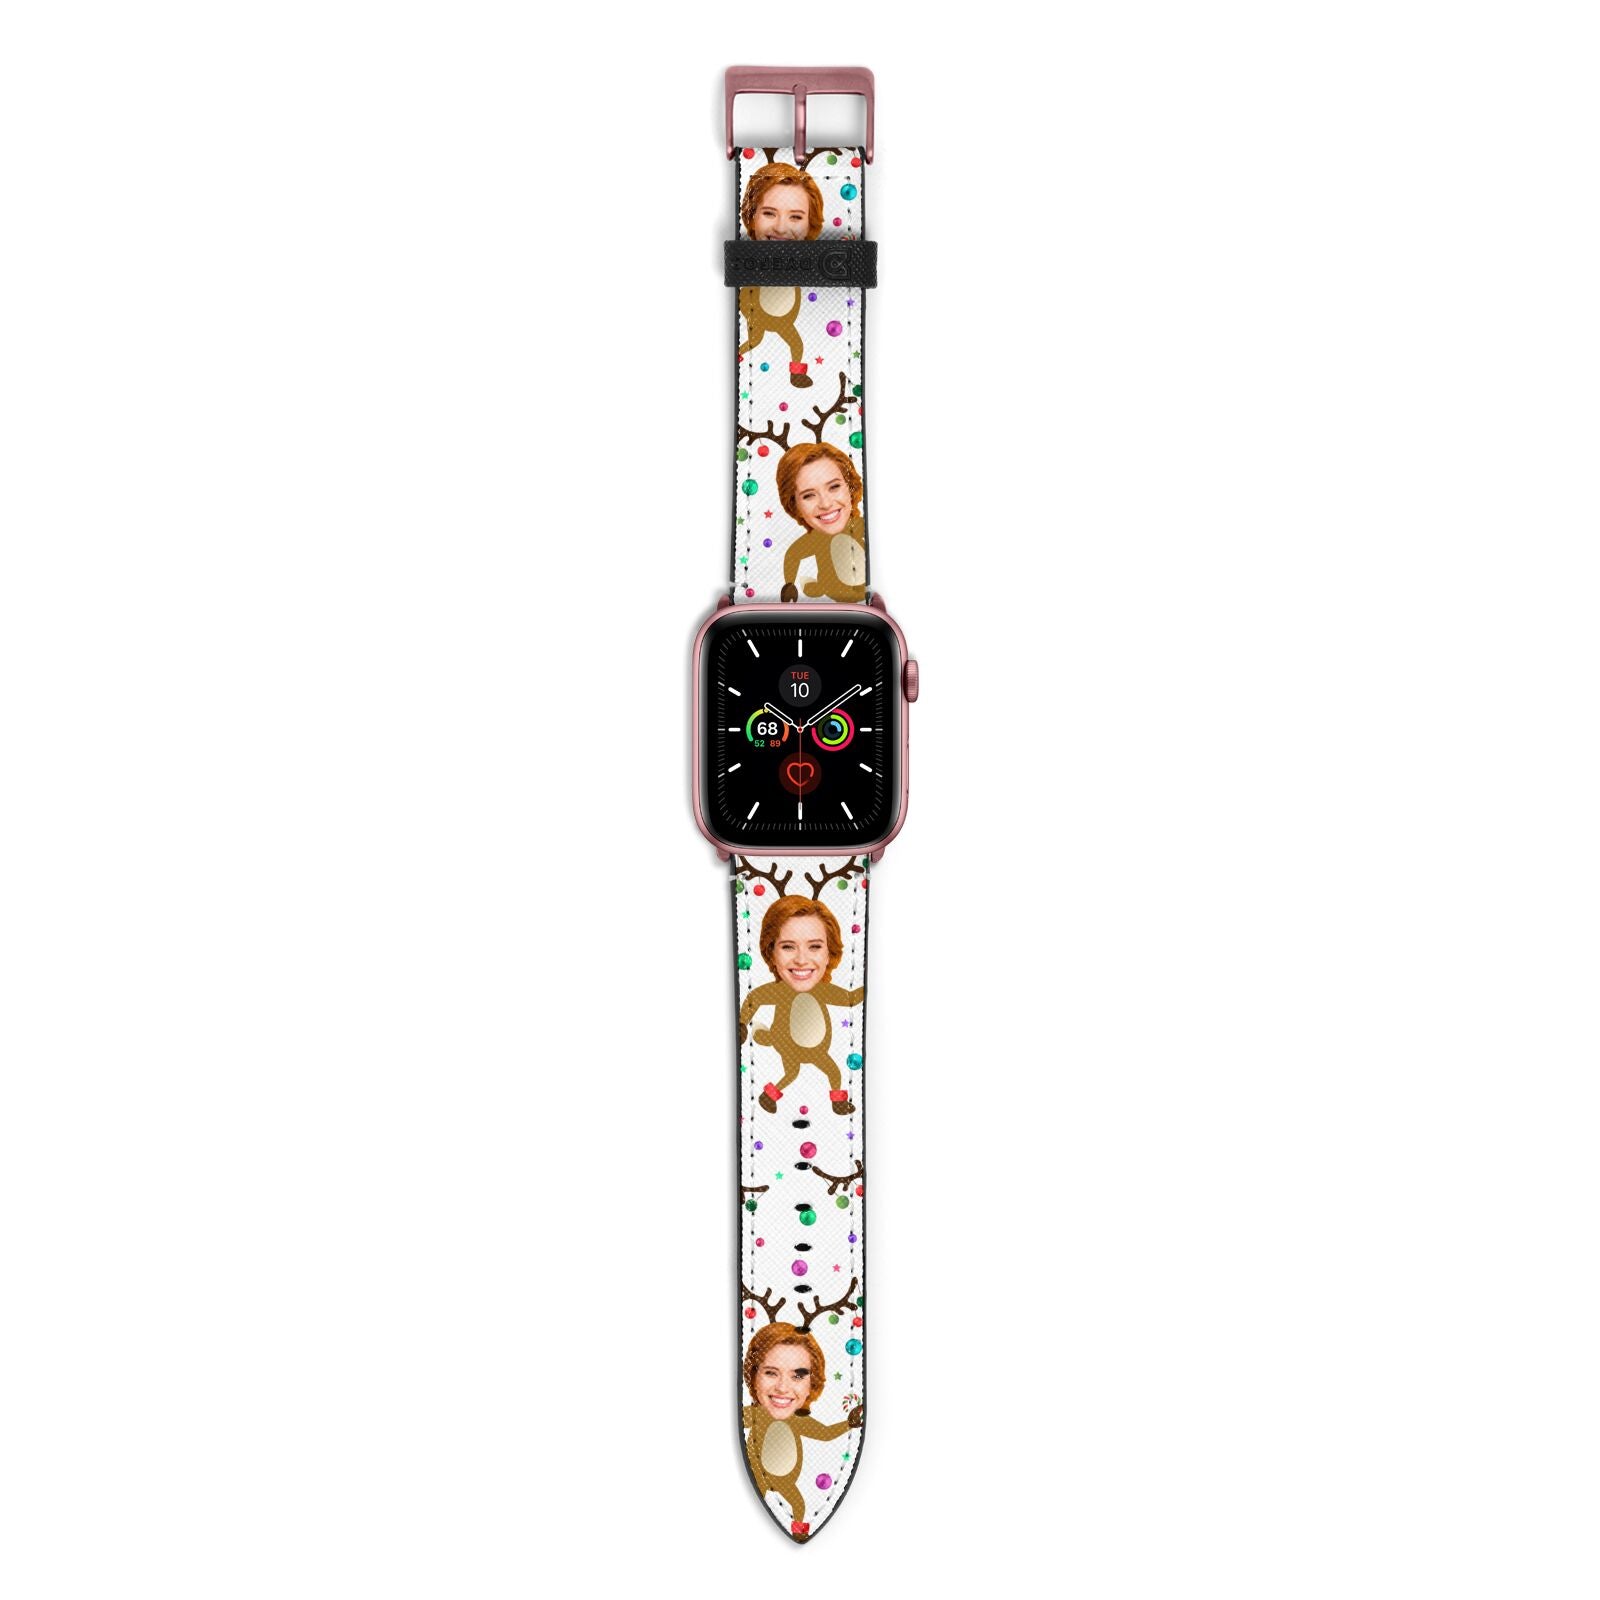 Reindeer Photo Face Apple Watch Strap with Rose Gold Hardware